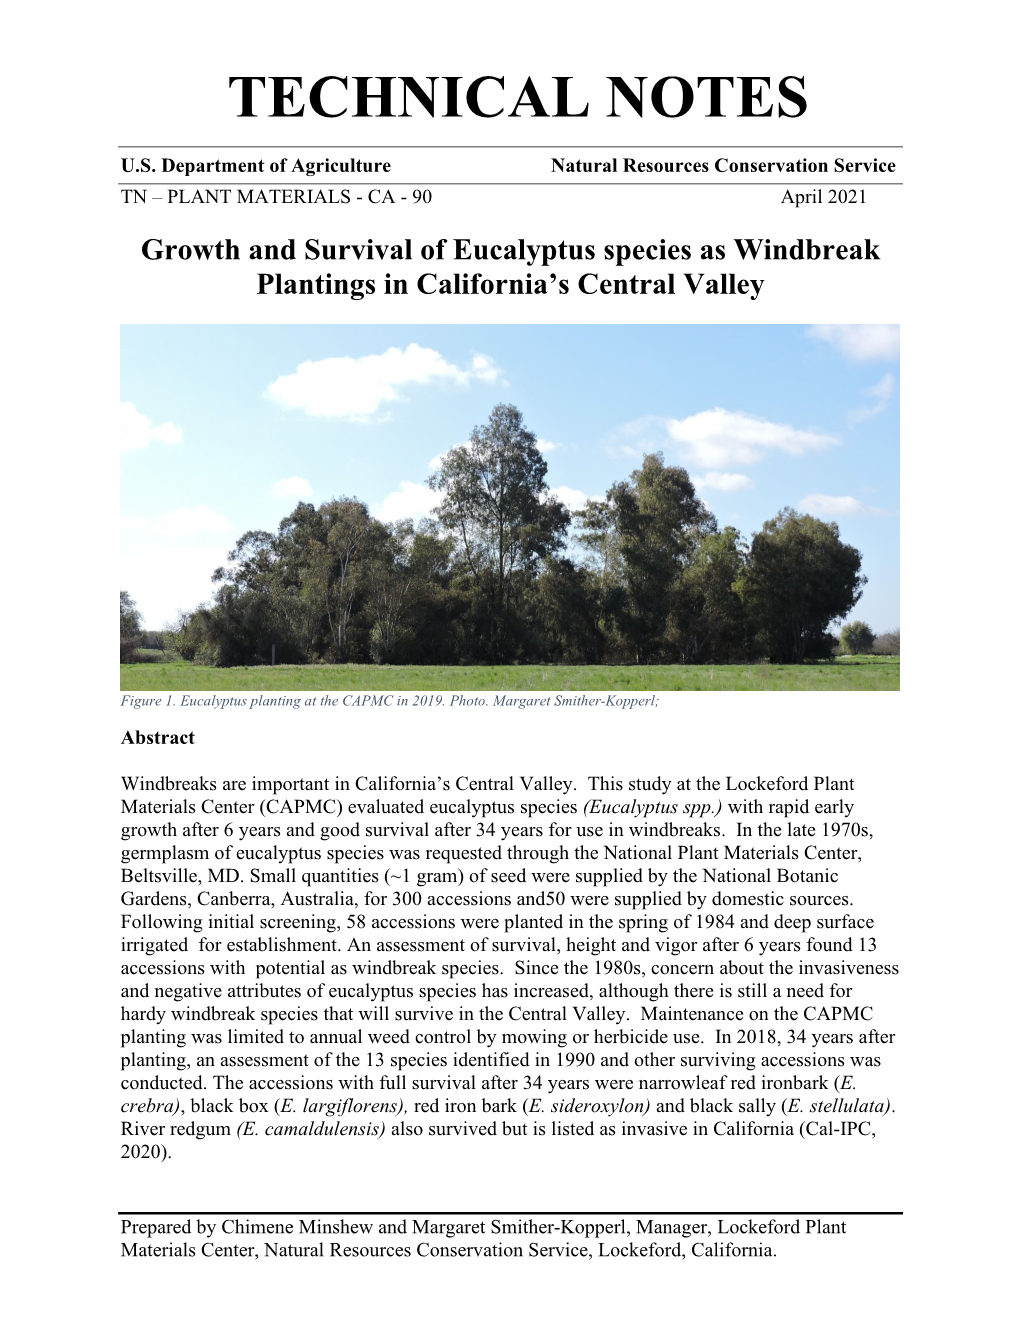 Growth and Survival of Eucalyptus Species As Windbreak Plantings in California's Central Valley